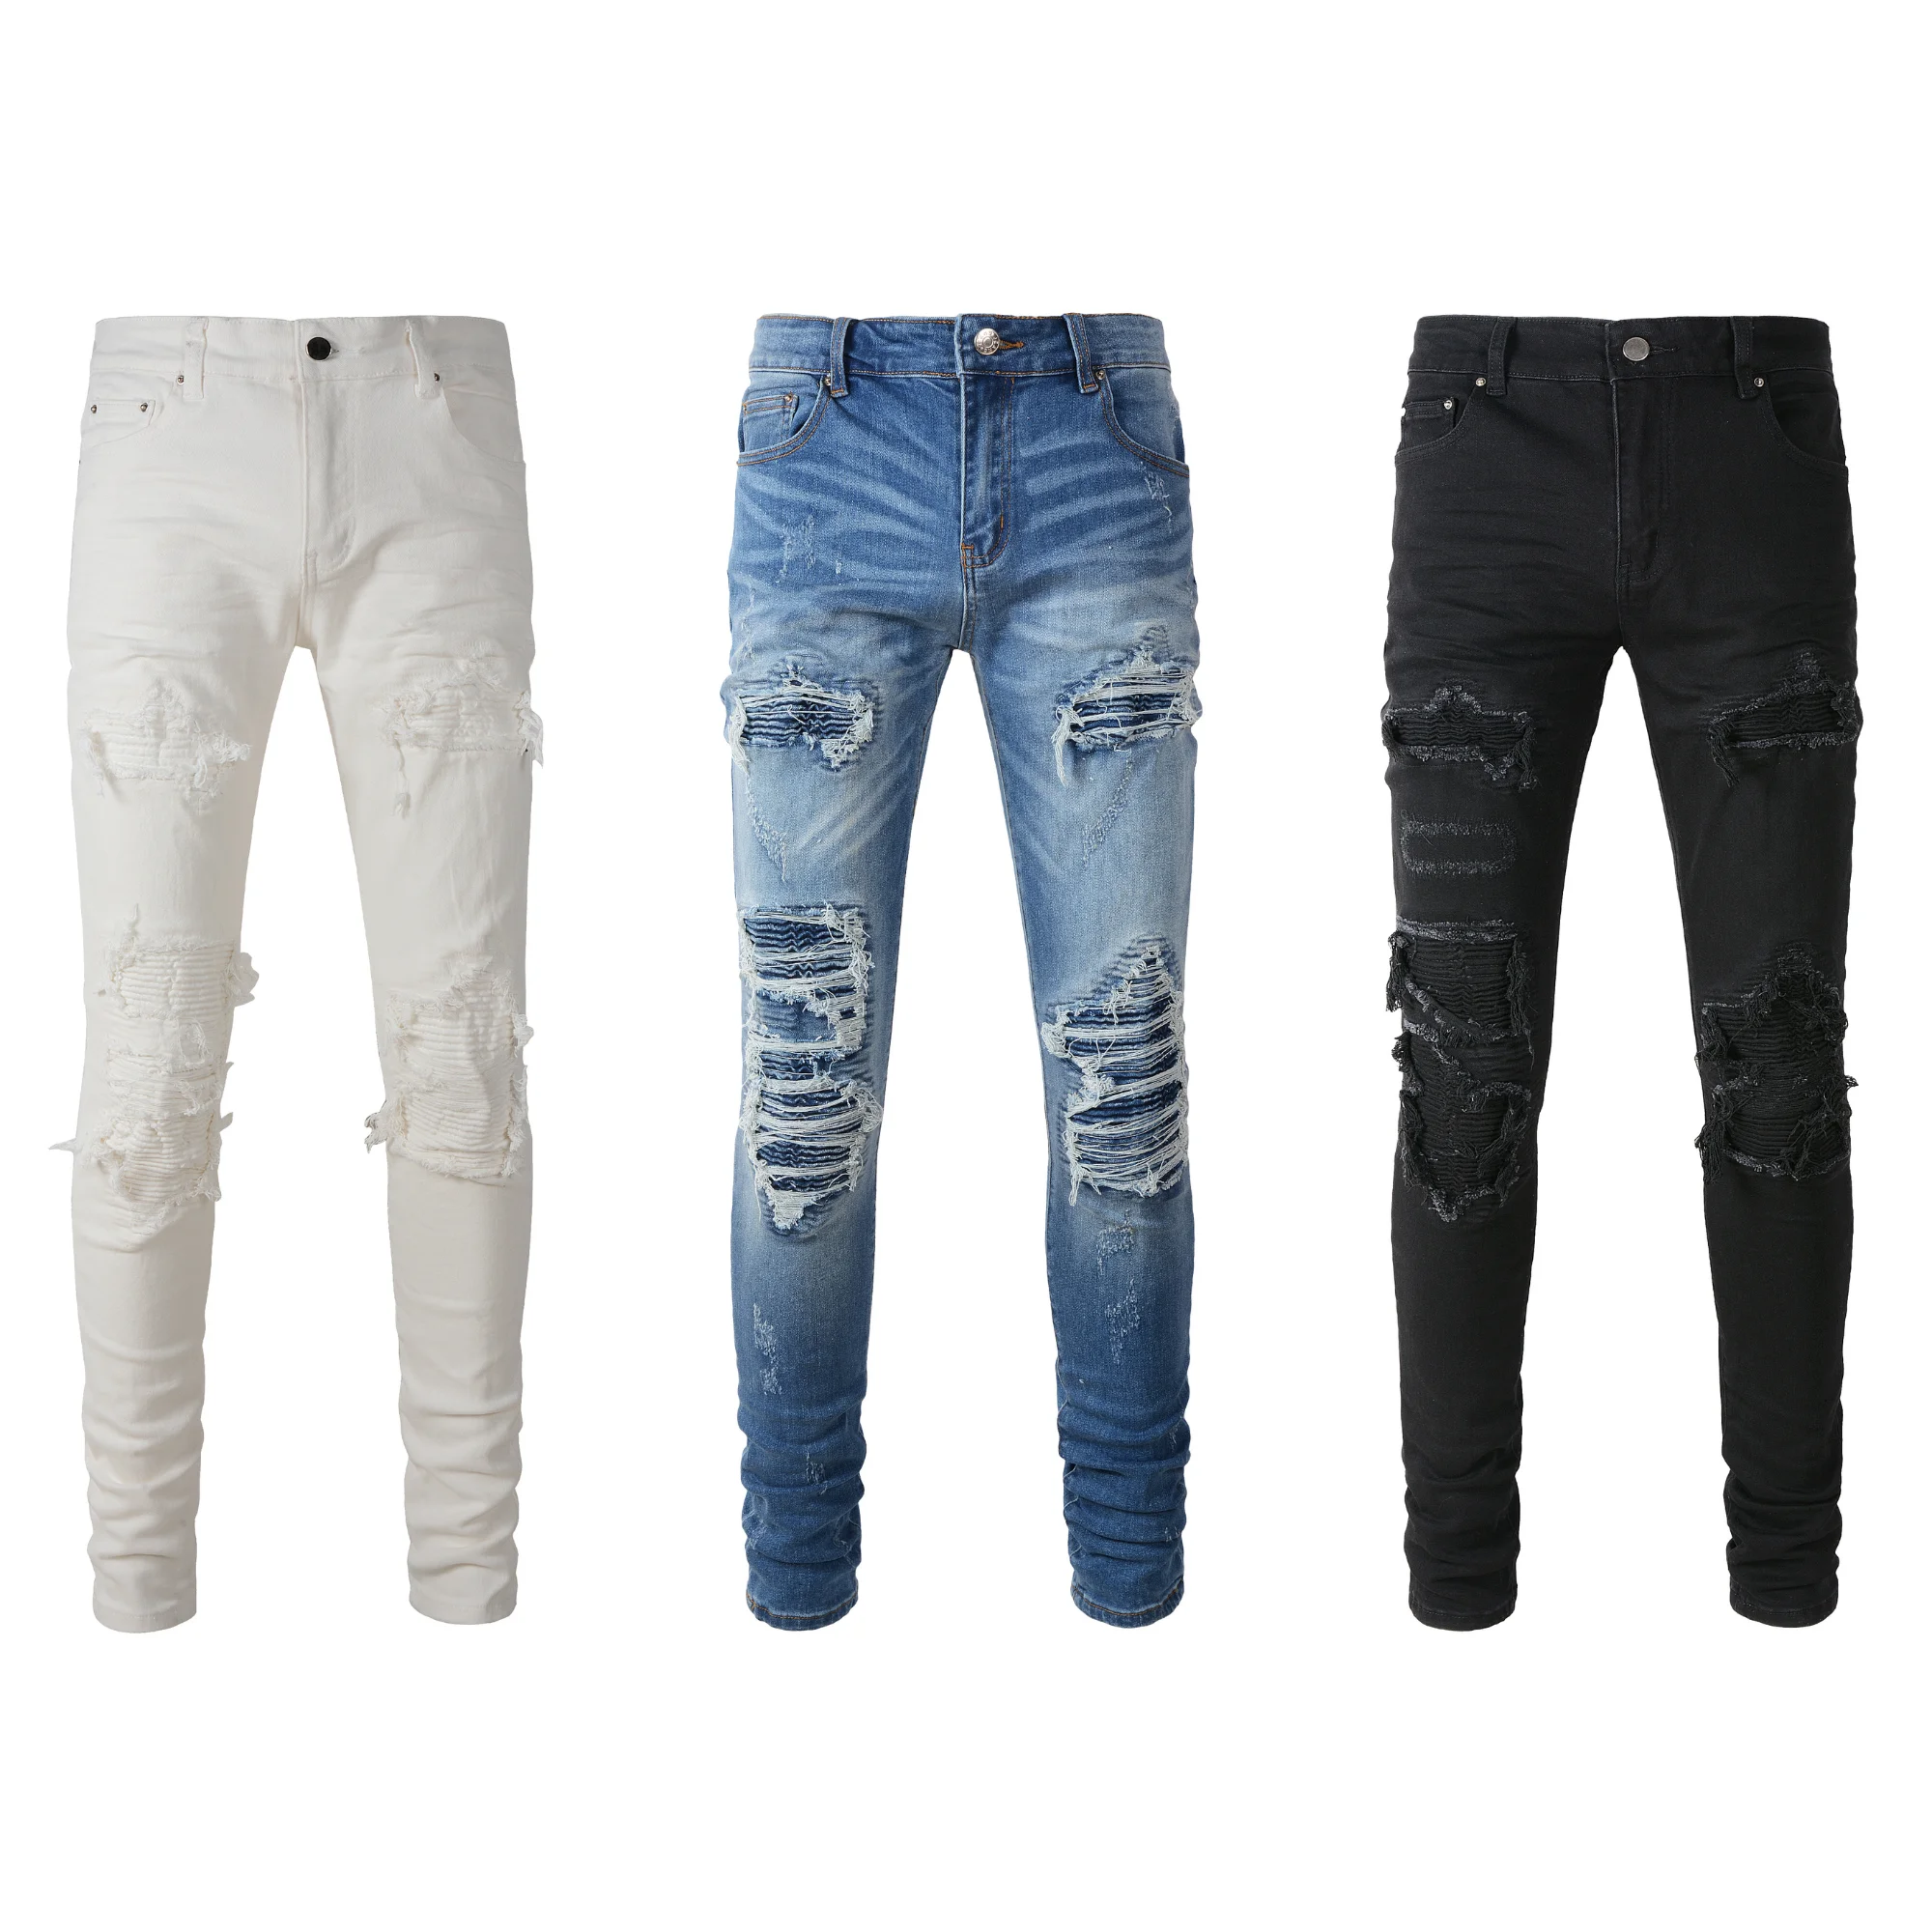 

Wholesale Dropshipping Ripped Distressed Ribbed Repaired Patched Slim Designer Men Denim Jeans